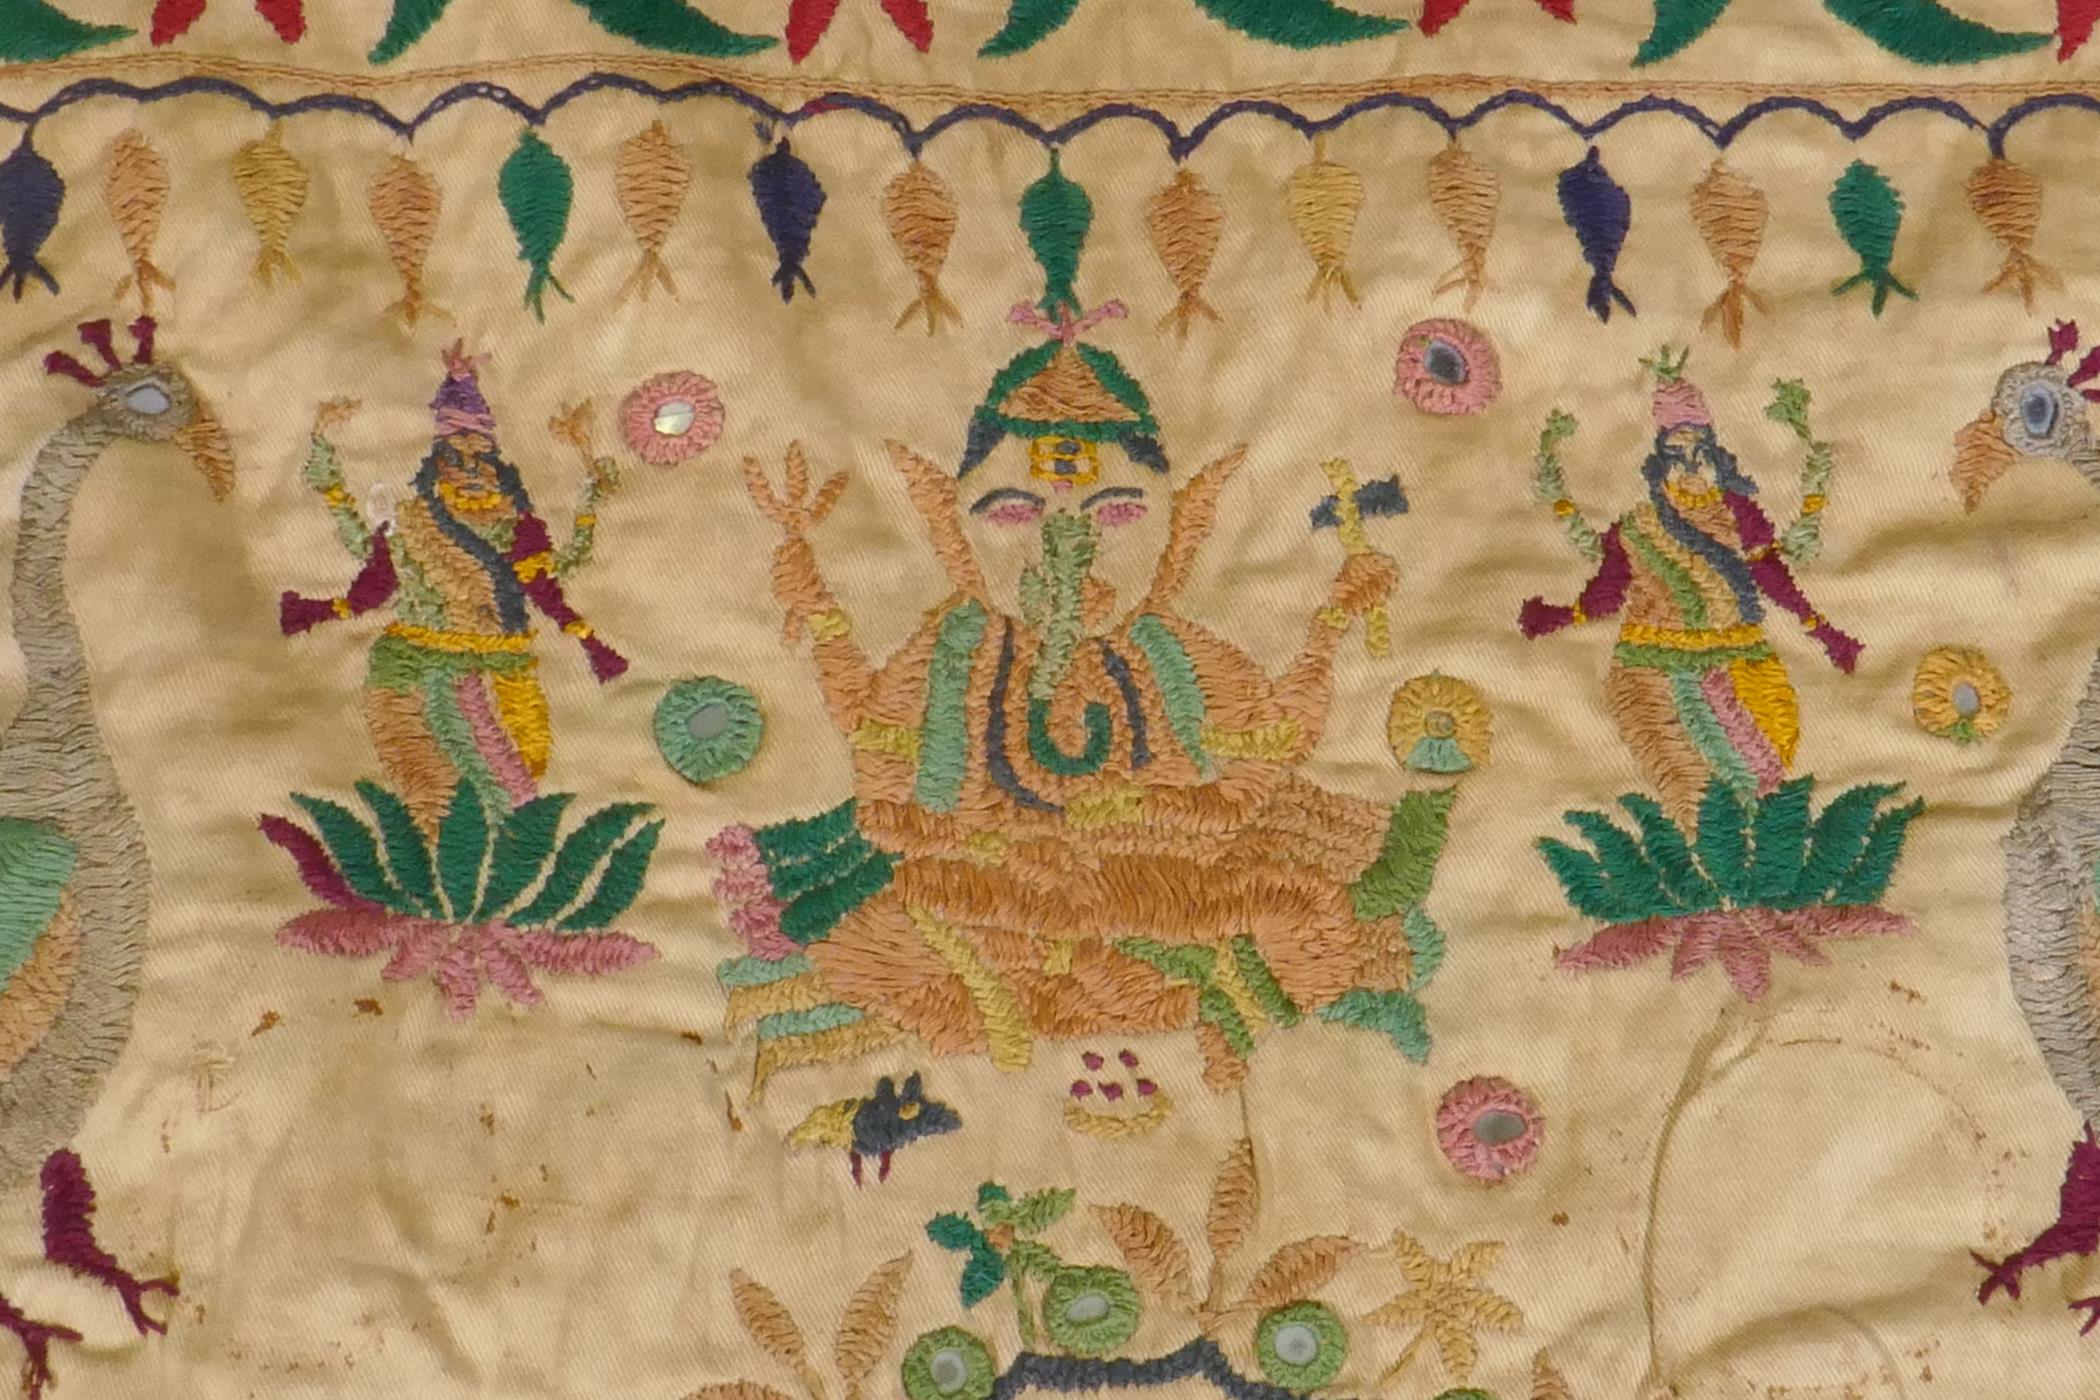 A C19th Indian embroidered wall hanging decorated with depictions of Ganesh, peacocks, elephants, - Image 3 of 9